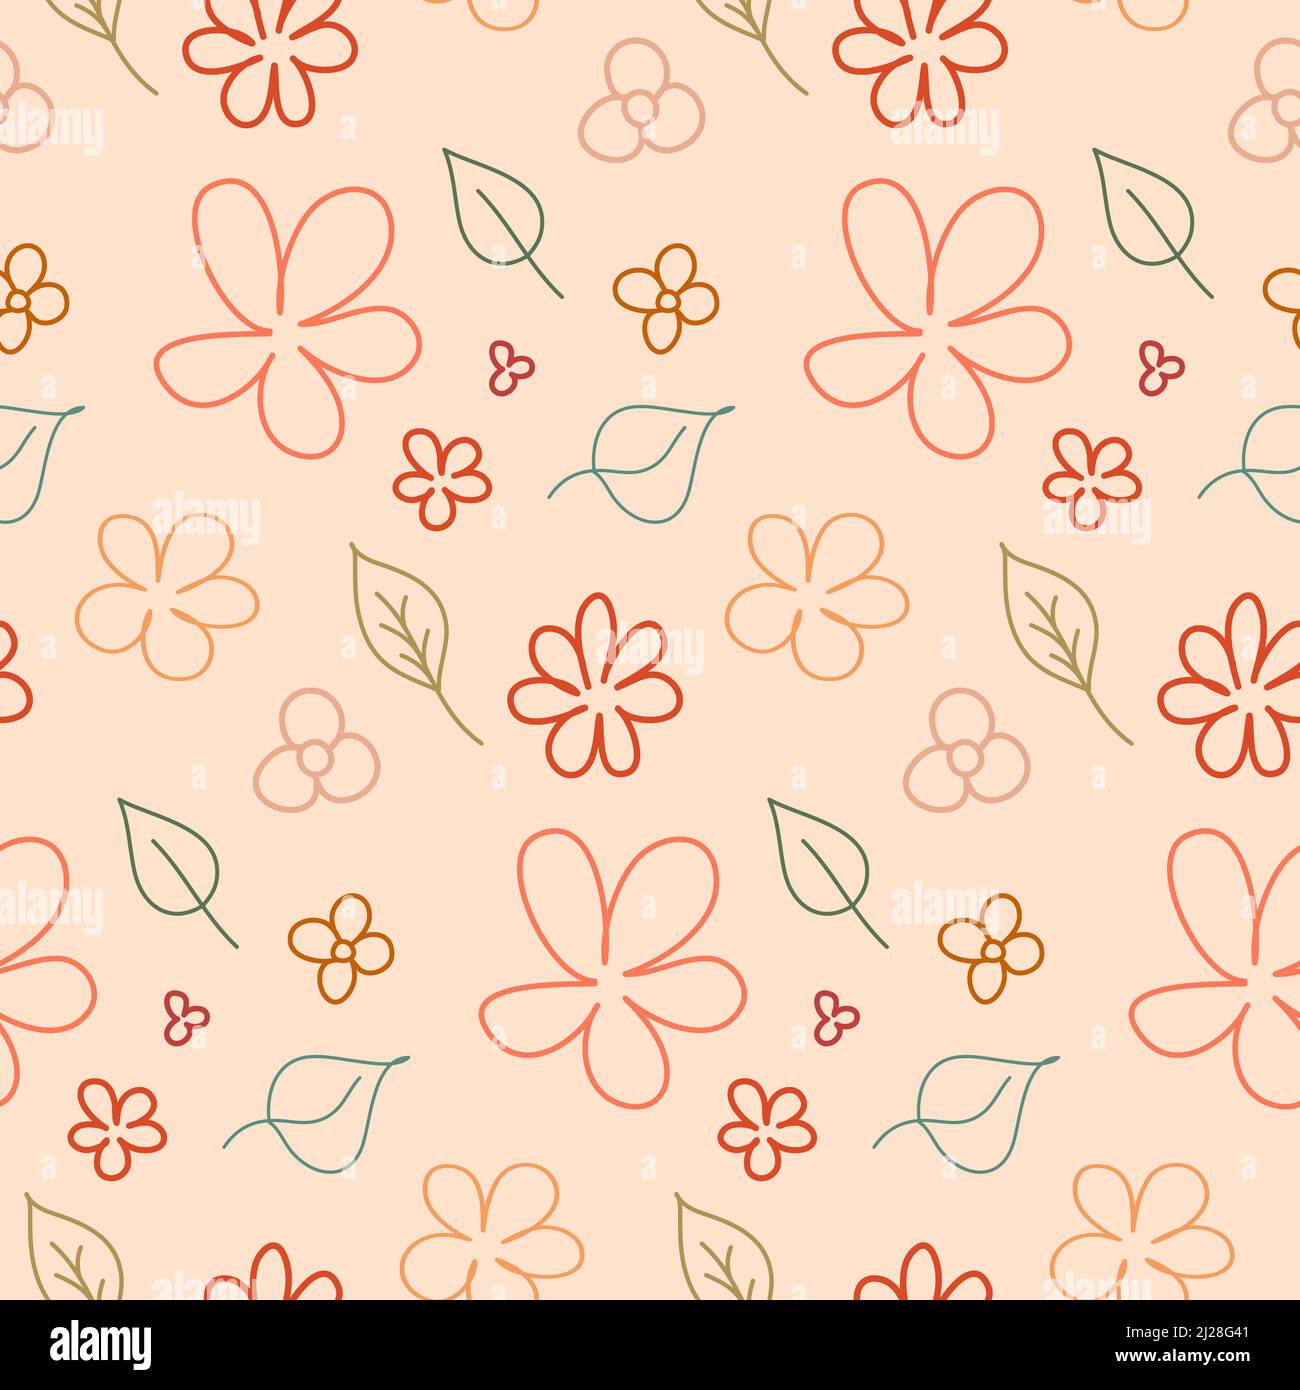 Seamless pattern cute simple flower stroke background wallpaper wrapping  textile design illustration Stock Photo - Alamy